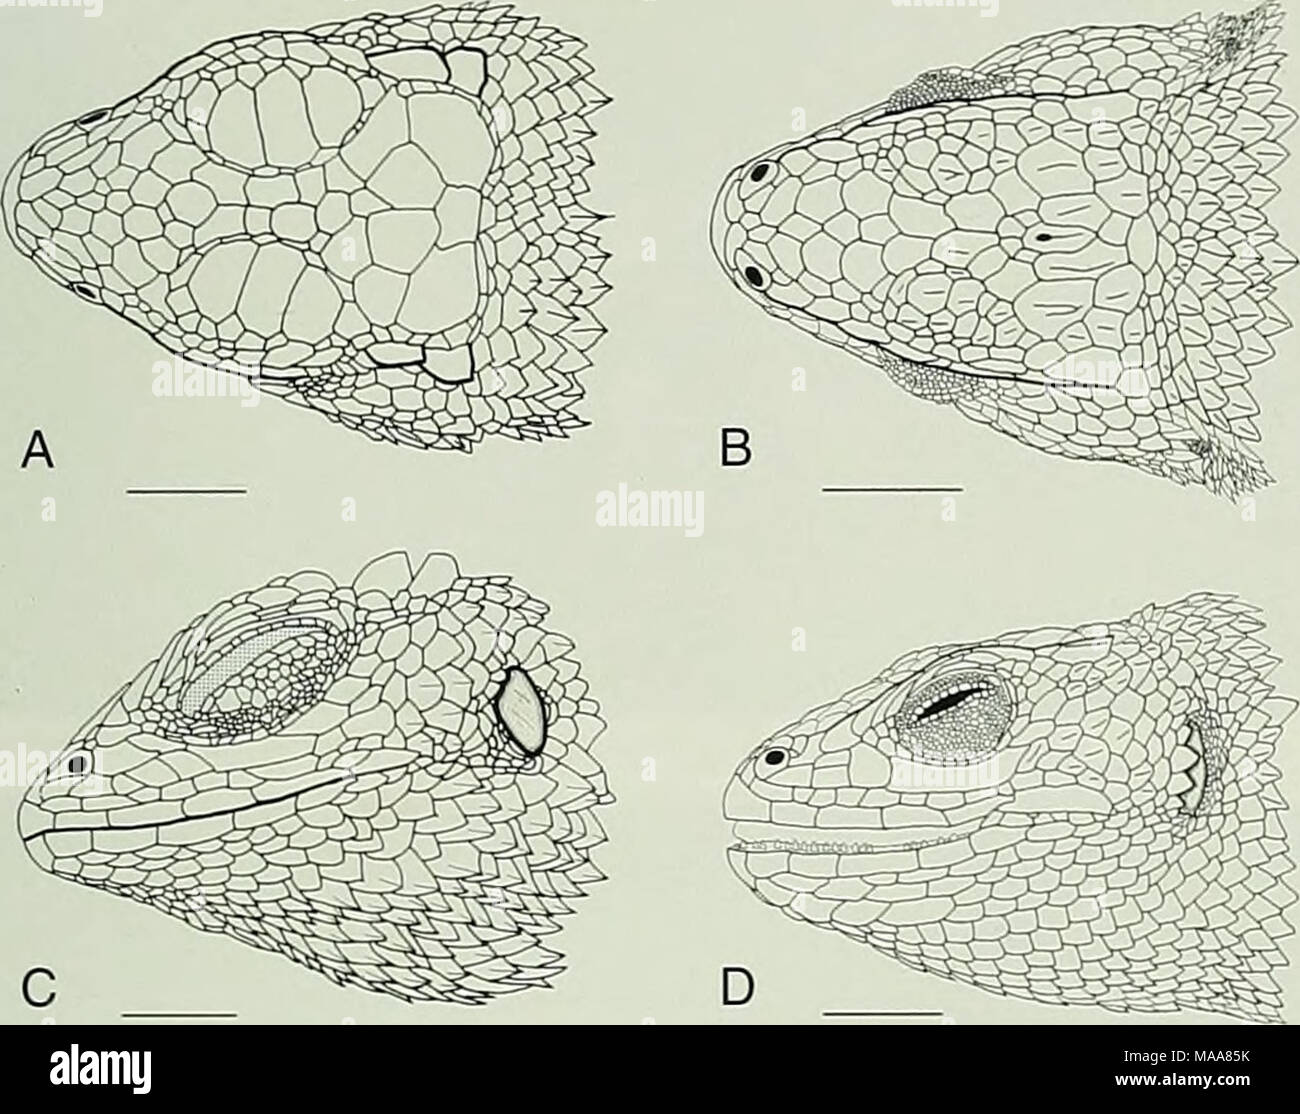 . Ecuadorian lizards of the genus Stenocercus (Squamata: Tropiduridae) . Fig. 3. Dorsal and lateral views of the heads of two species of Stenocercus. A and C S. aculeatiis, EPN 4051, male. B and D S. angel, holo- type, QCAZ 3733, male. Damaged tissue is stippled. Scale bars = 5 mm. locality. Avila-Pires (1995) and Cadle (1991) reported this species from several localities in Provincia Pastaza, Ecuador. Stenocercus angel new species Holotype.—QCAZ 3733, an adult male, from 8 km NE El Angel on road to Tulcan (00°40' N, 77°52' W), Provincia Carchi, Ecuador, collected on 17 May 1997 by Jaime A. Ch Stock Photo